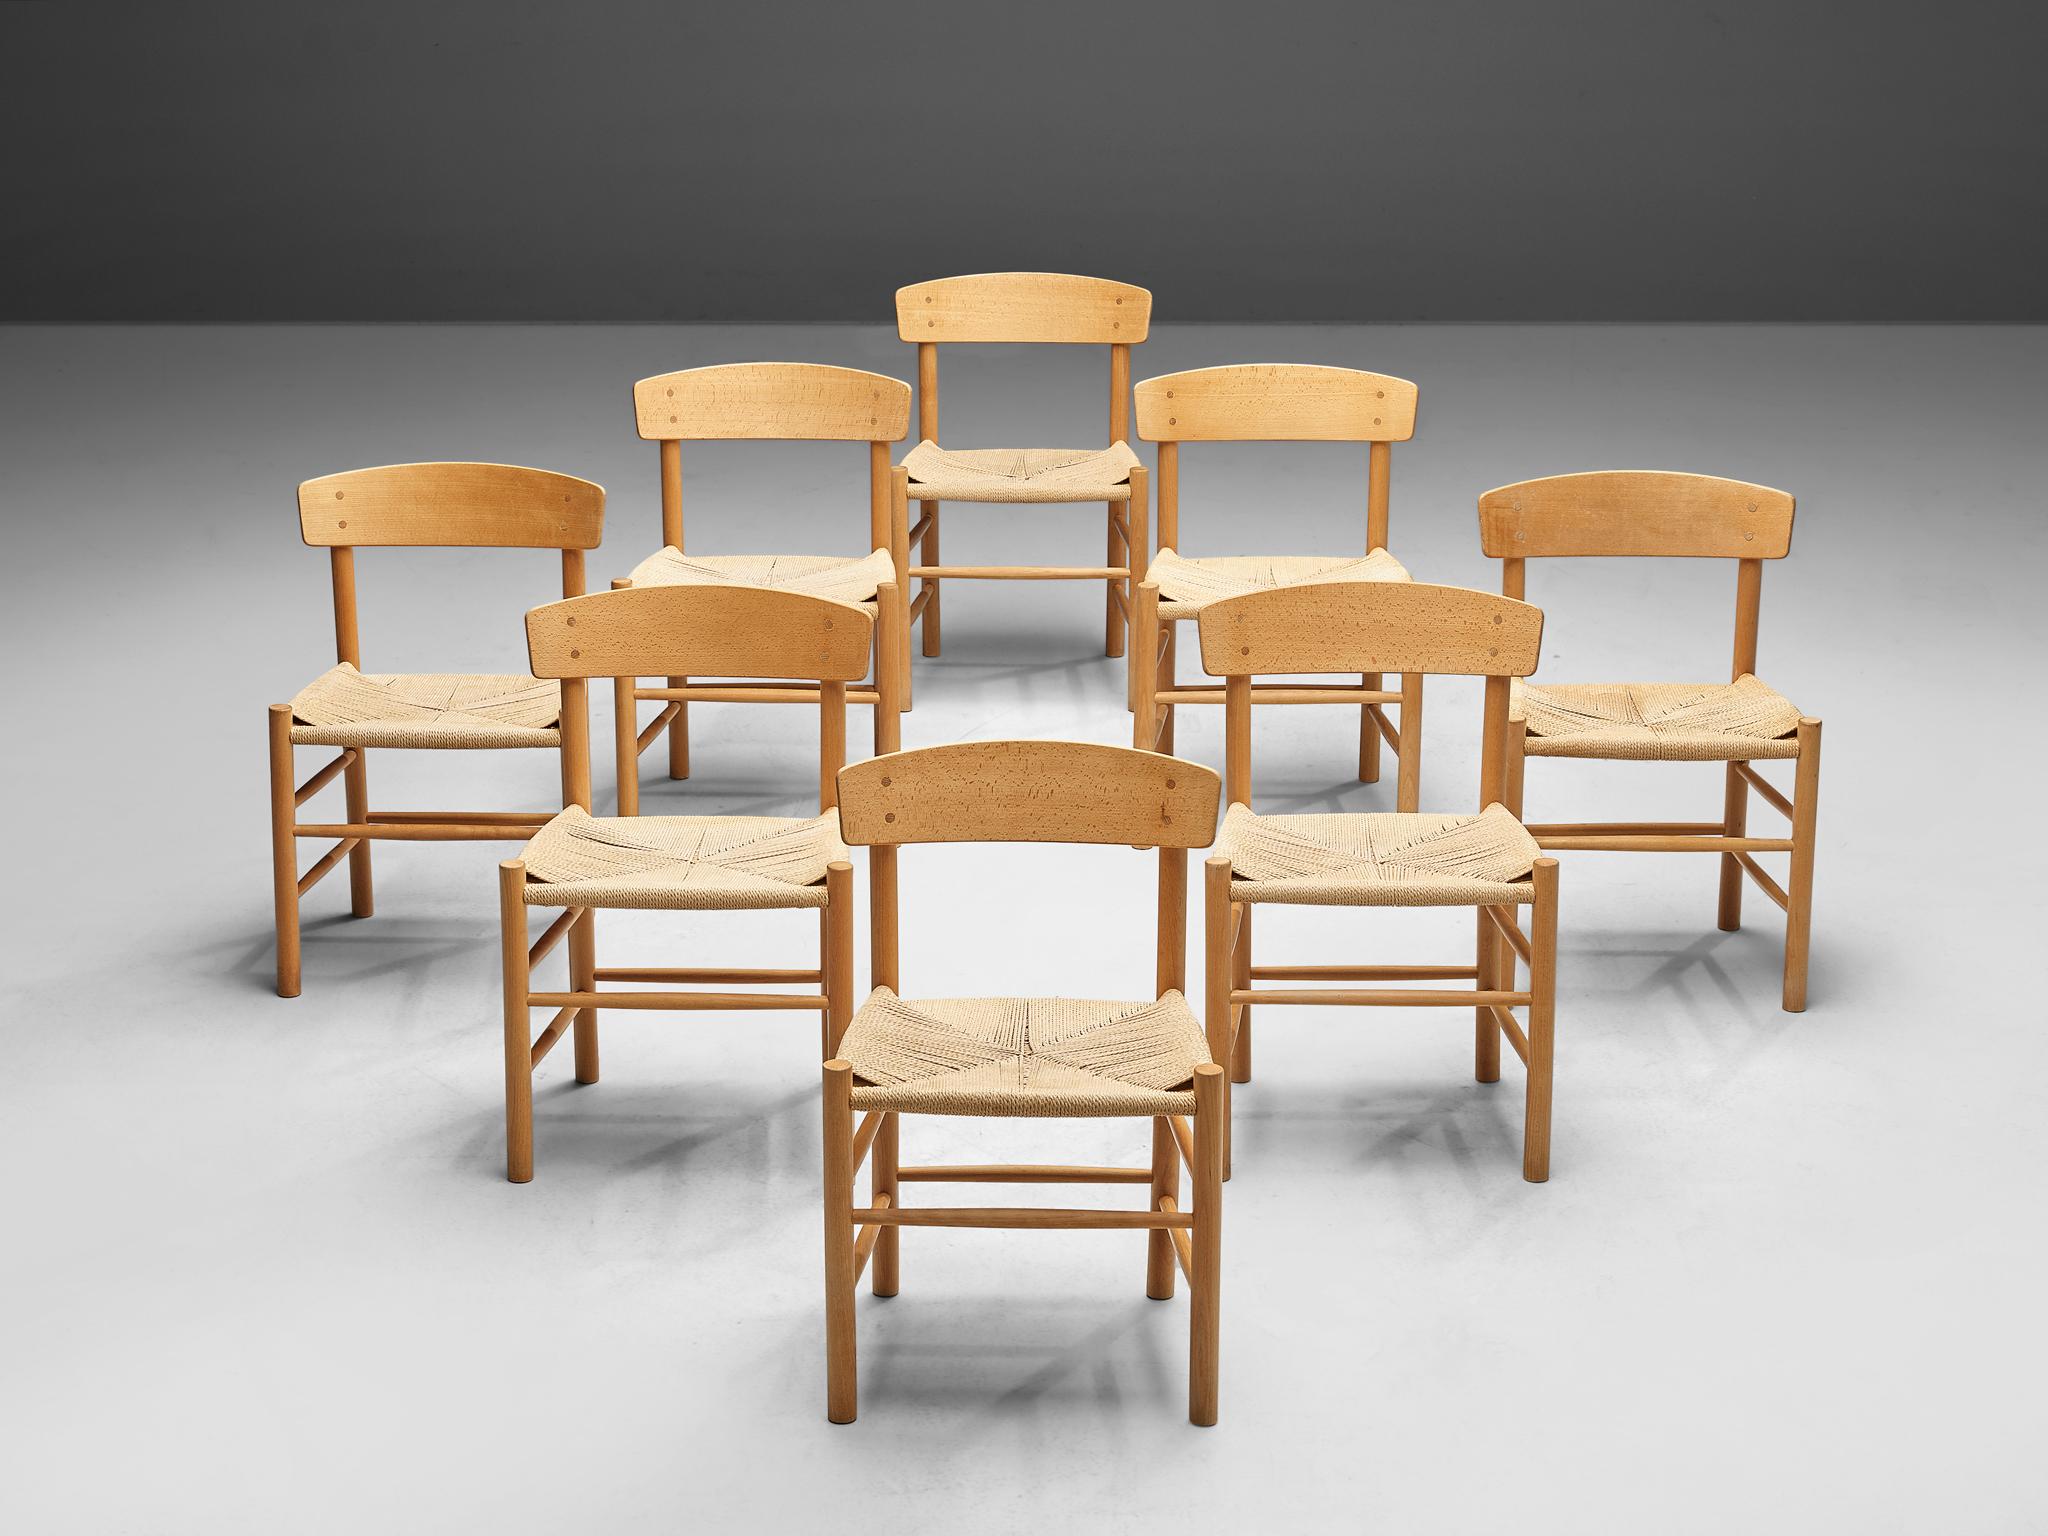 Børge Mogensen or FDB Møbler, set of eight of dining chairs model 'J39', beech, handwoven seagrass, Denmark, design 1947.

The design of Børge Mogensen's J39 design is in many ways aesthetically pleasing. Not only provides the handwoven seagrass a